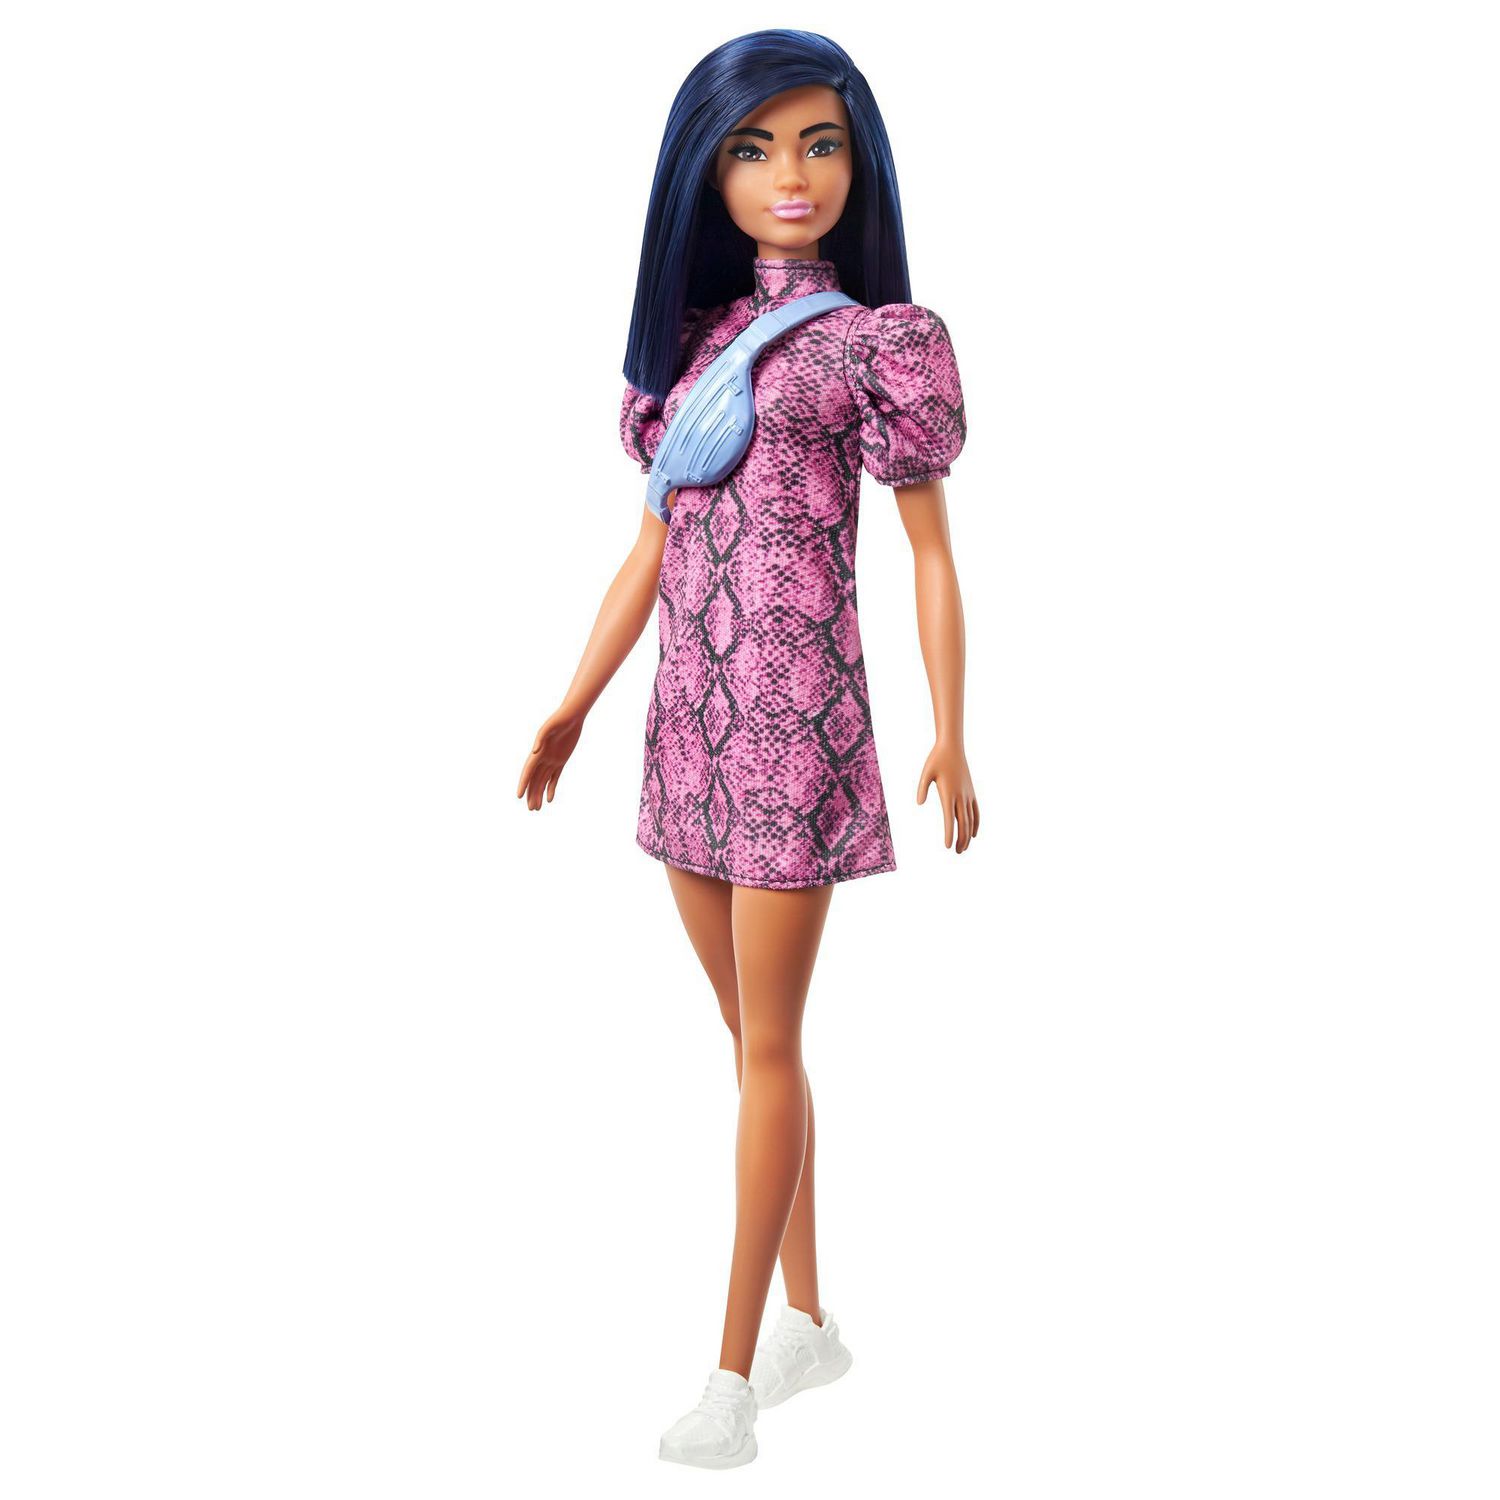 Barbie Fashionistas Doll with Blue Hair Wearing Pink & Black Dress